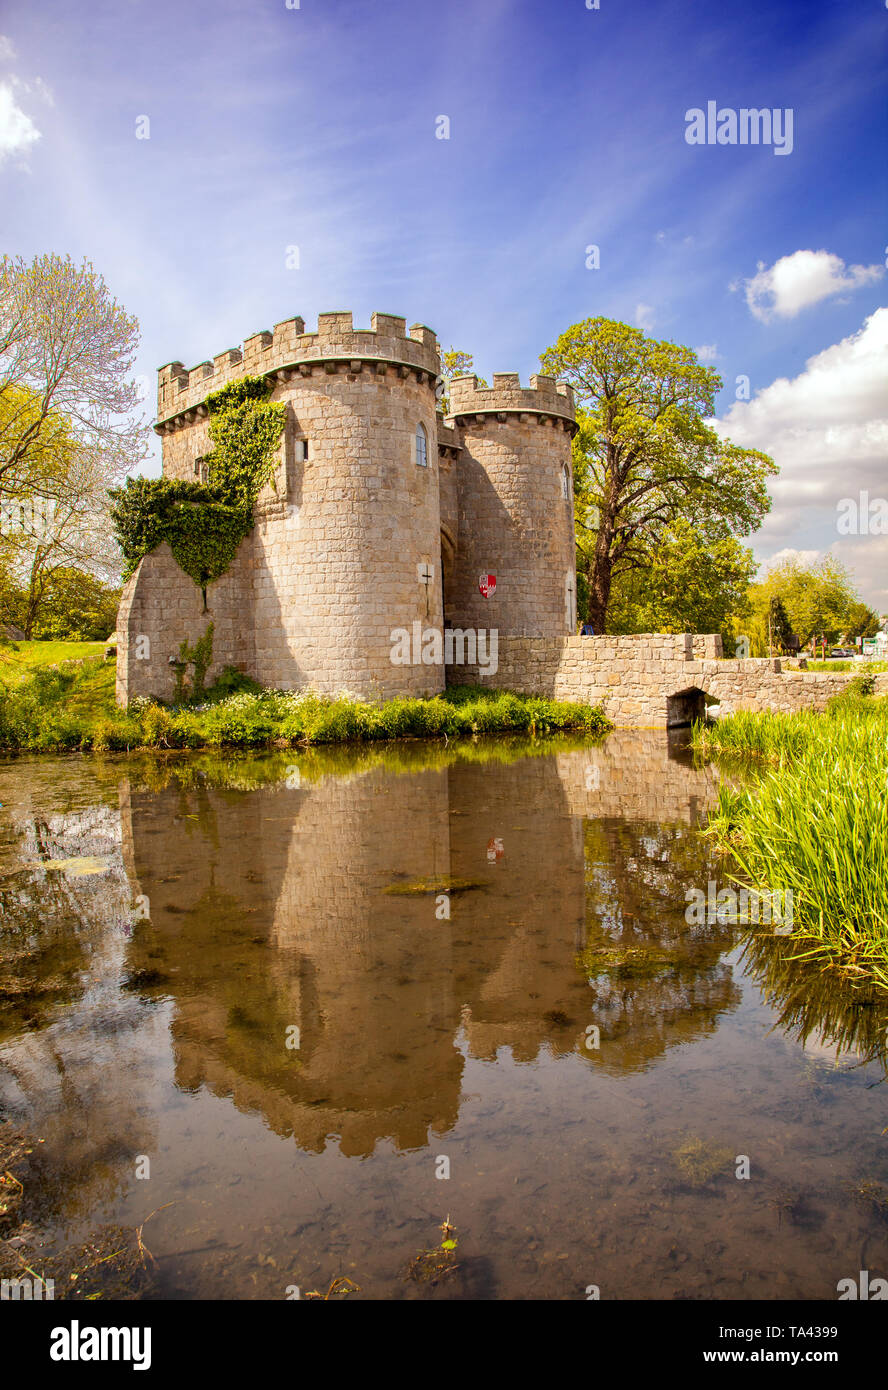 Whittington Castle, owned by the Whittington castle Preservation Fund is a motte-and-bailey castle  near Oswestry in North Shropshire England UK Stock Photo